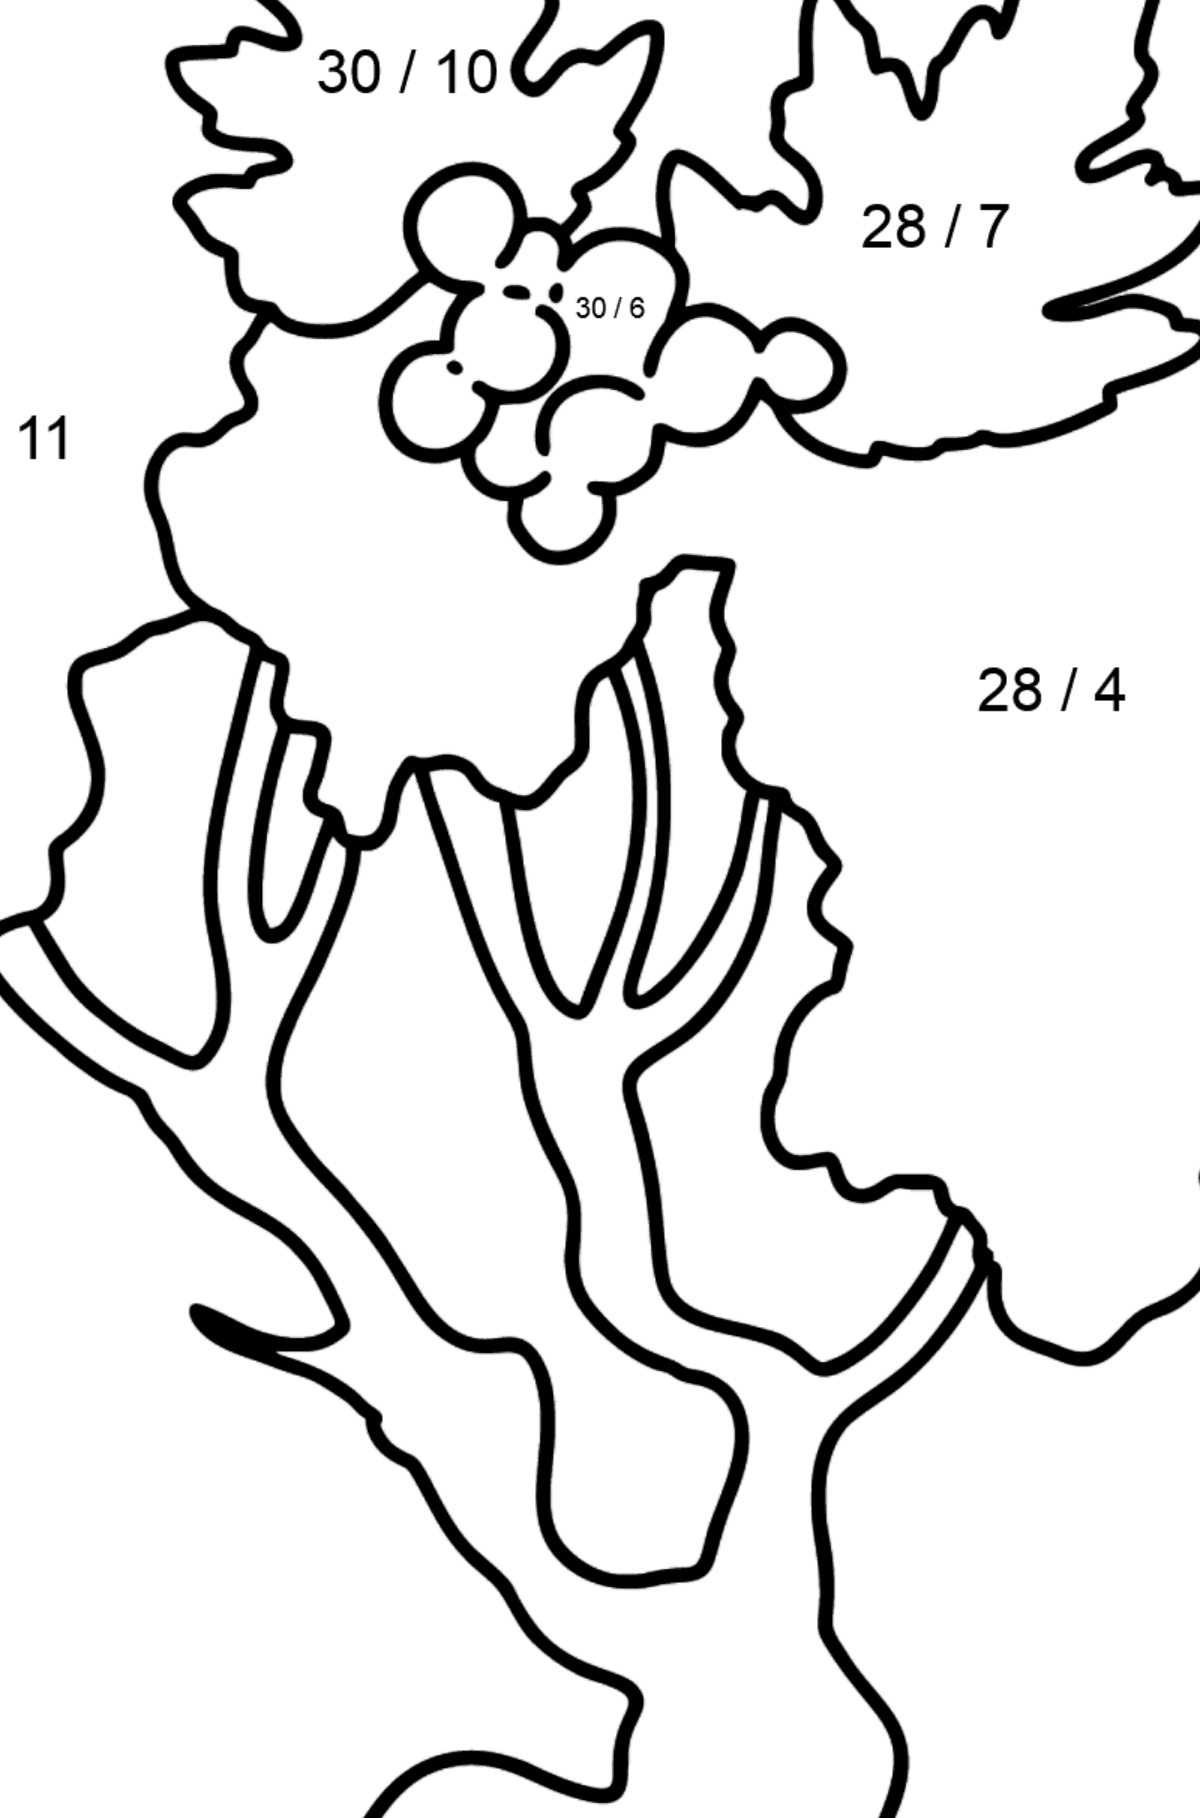 Hawthorn coloring page - Math Coloring - Division for Kids